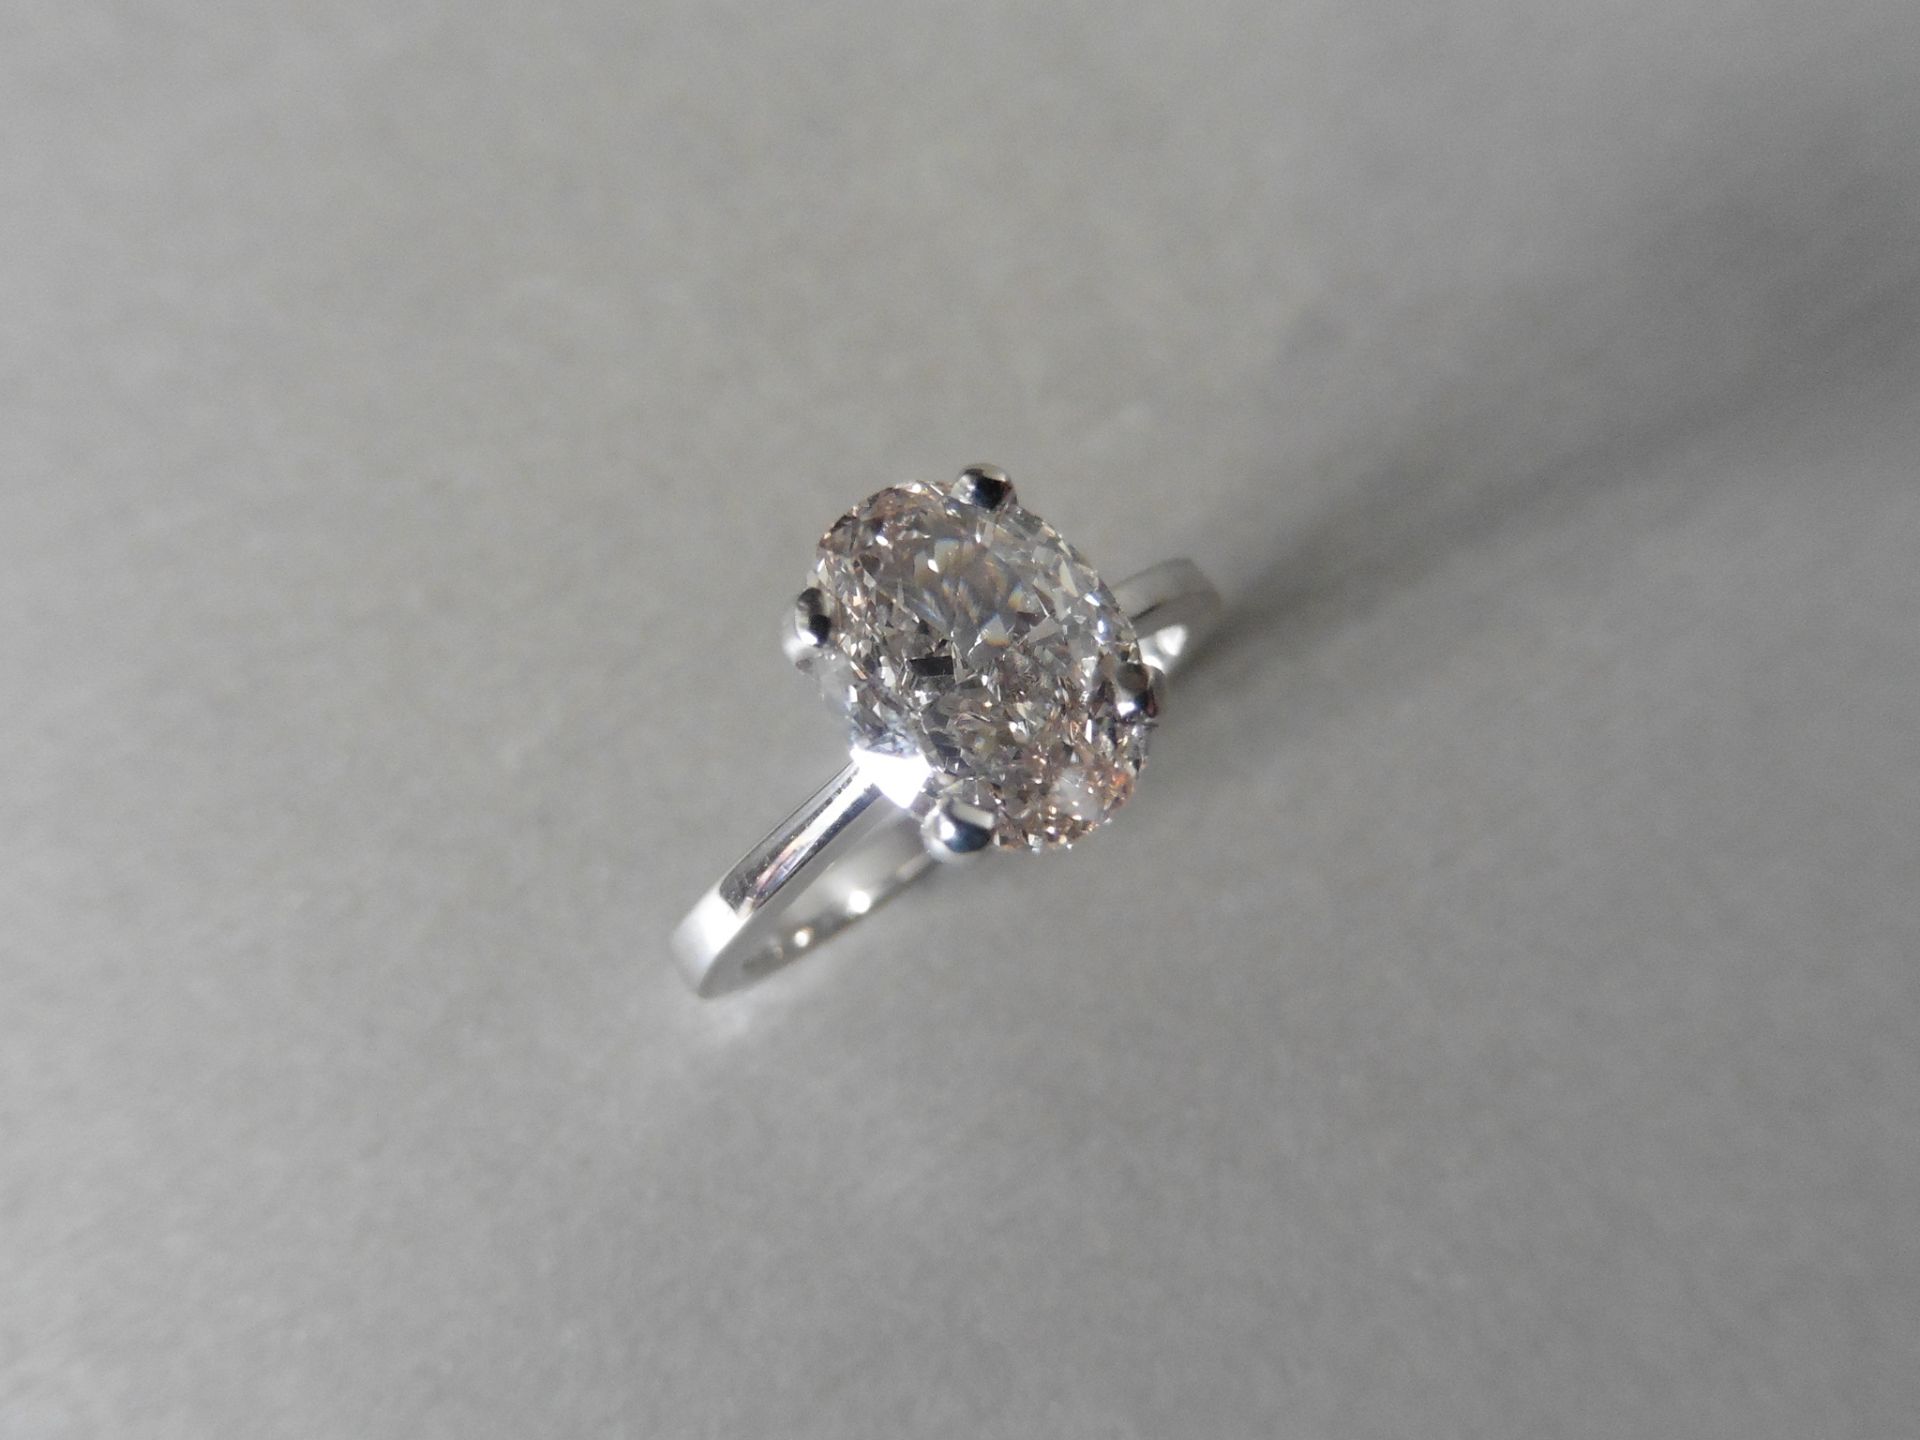 2.21ct oval cut diamond solitaire ring. Set in 18ct white gold, M colour, VS2 clarity. 9.02 x 6.79 x